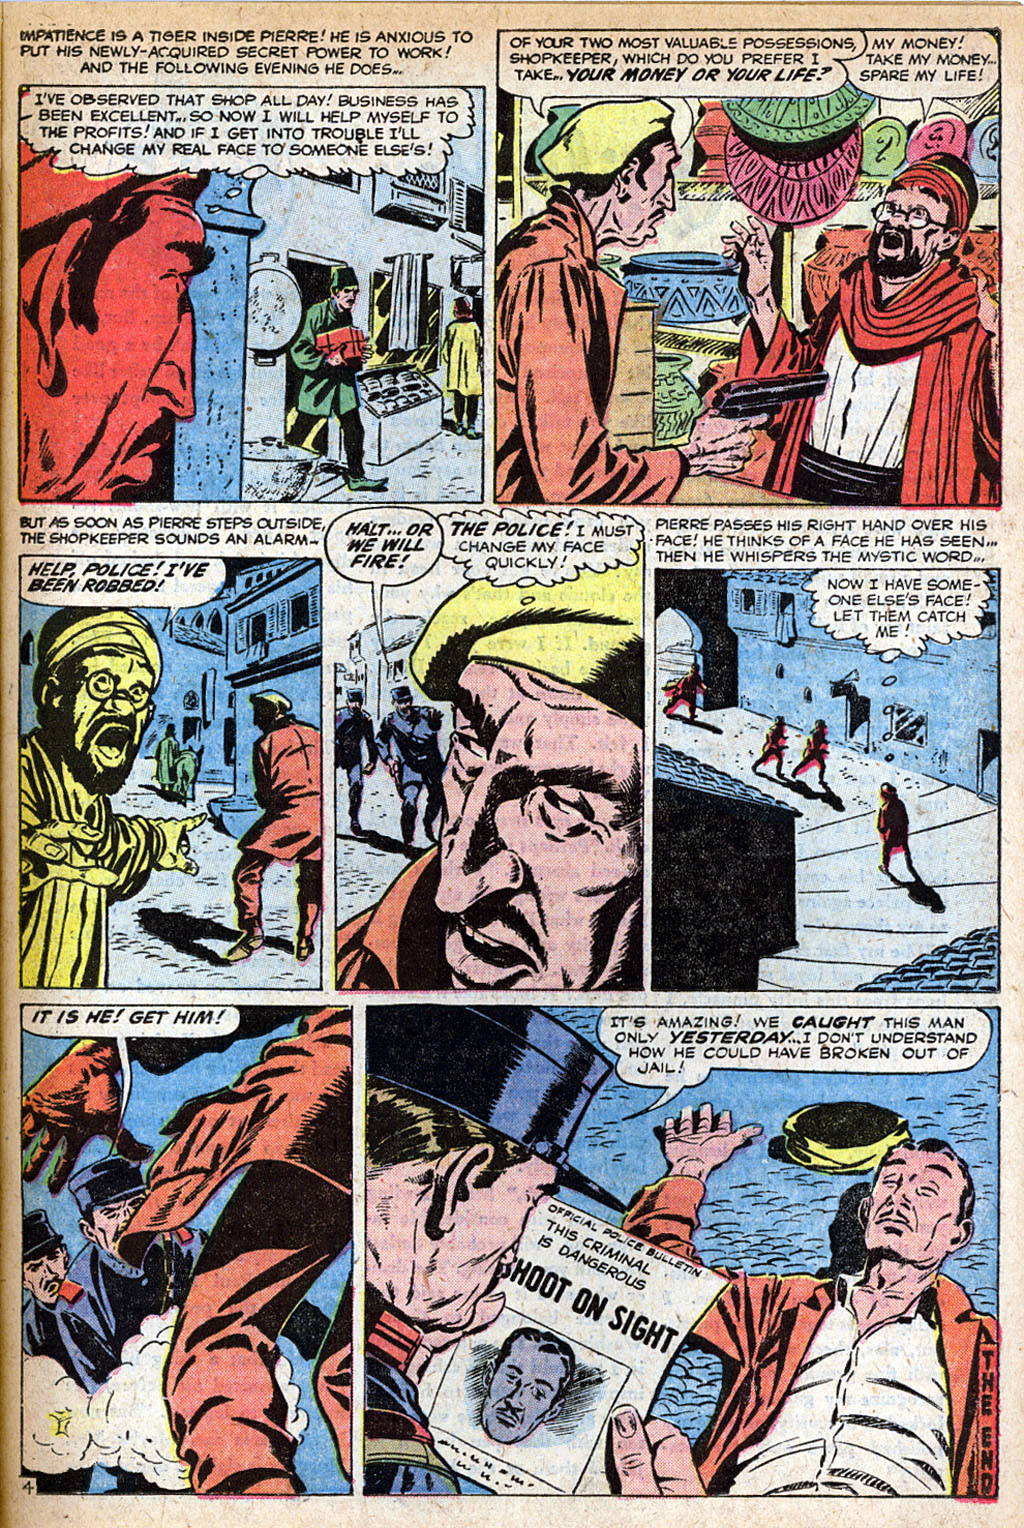 Marvel Tales (1949) 156 Page 14